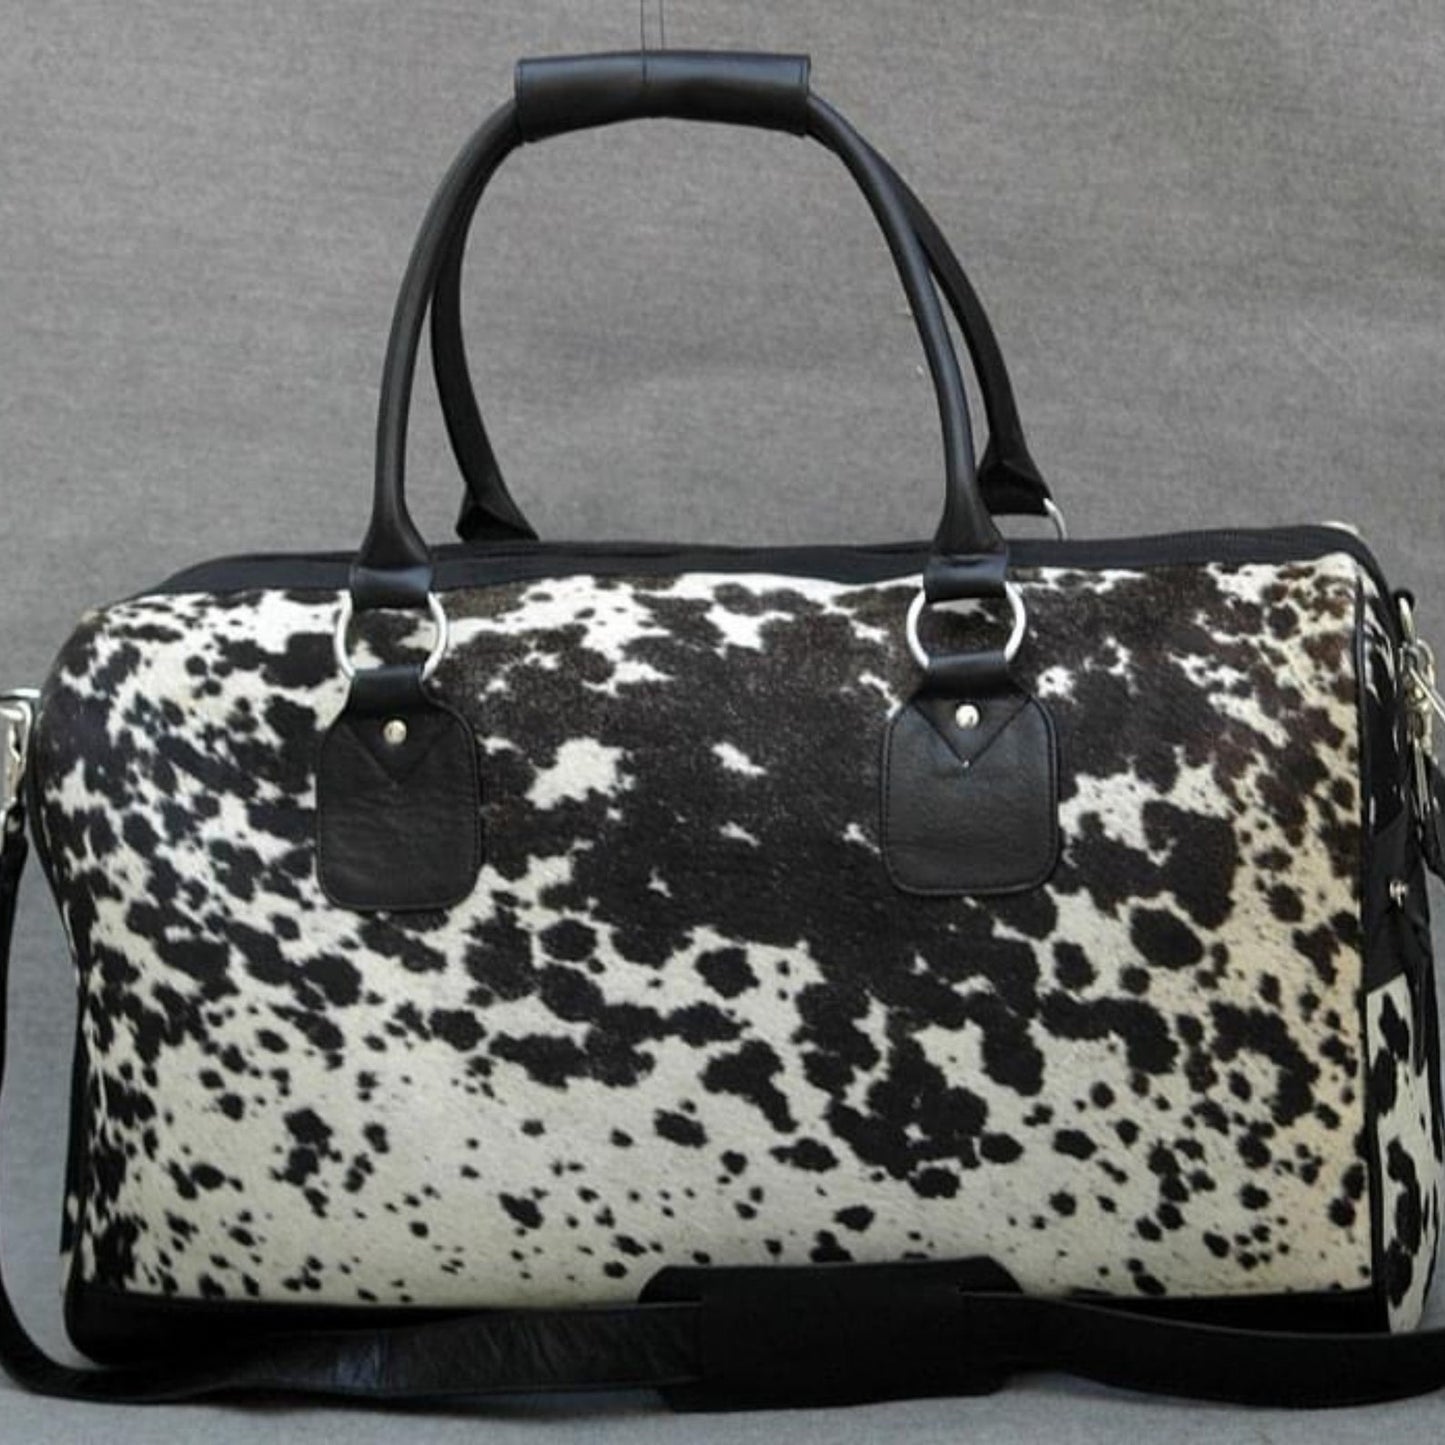 Experience the allure of exploration with a chic cow fur weekender bag, crafted for the modern traveler.